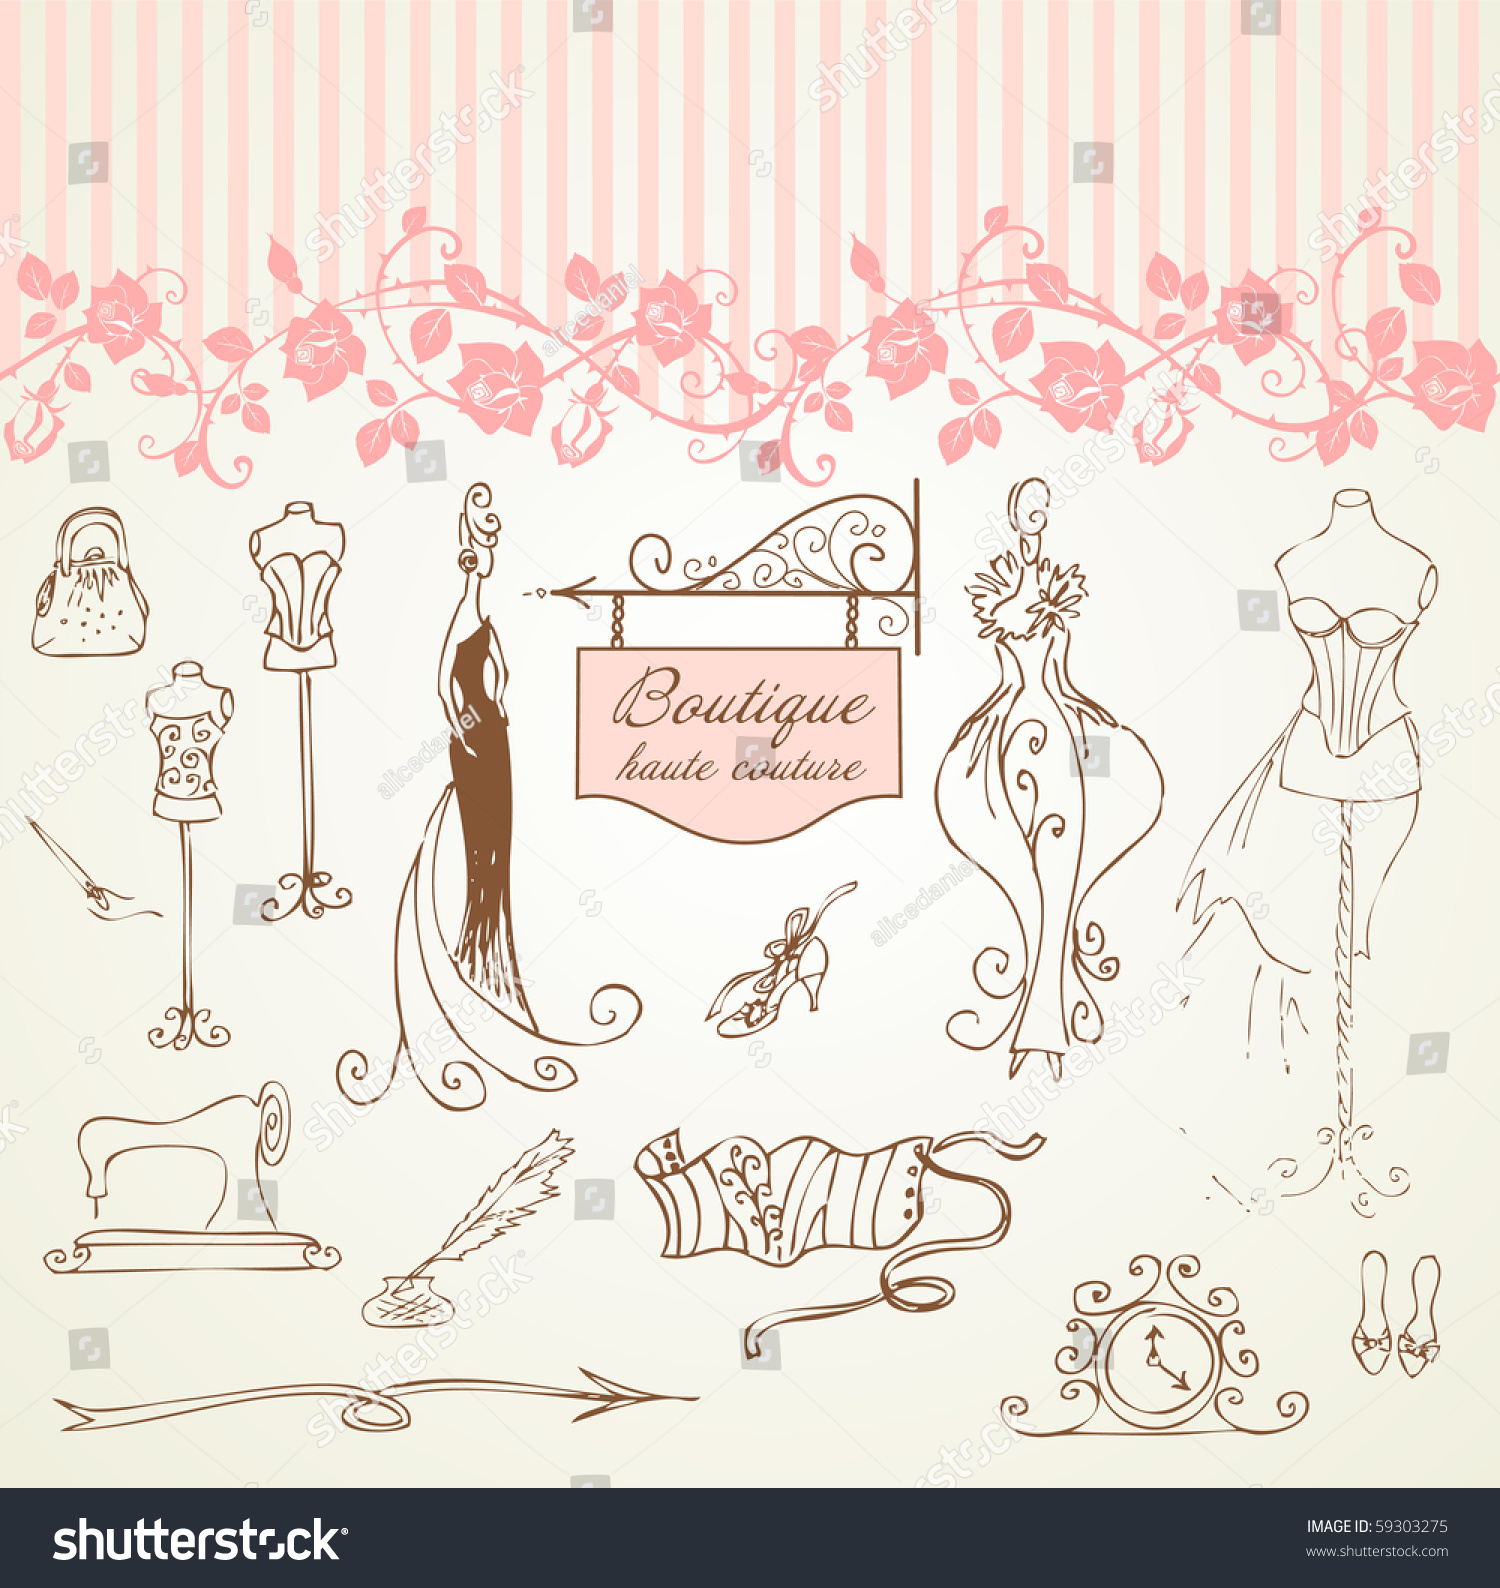 Boutique Haute Couture And Dressmaking Stock Vector Illustration ...